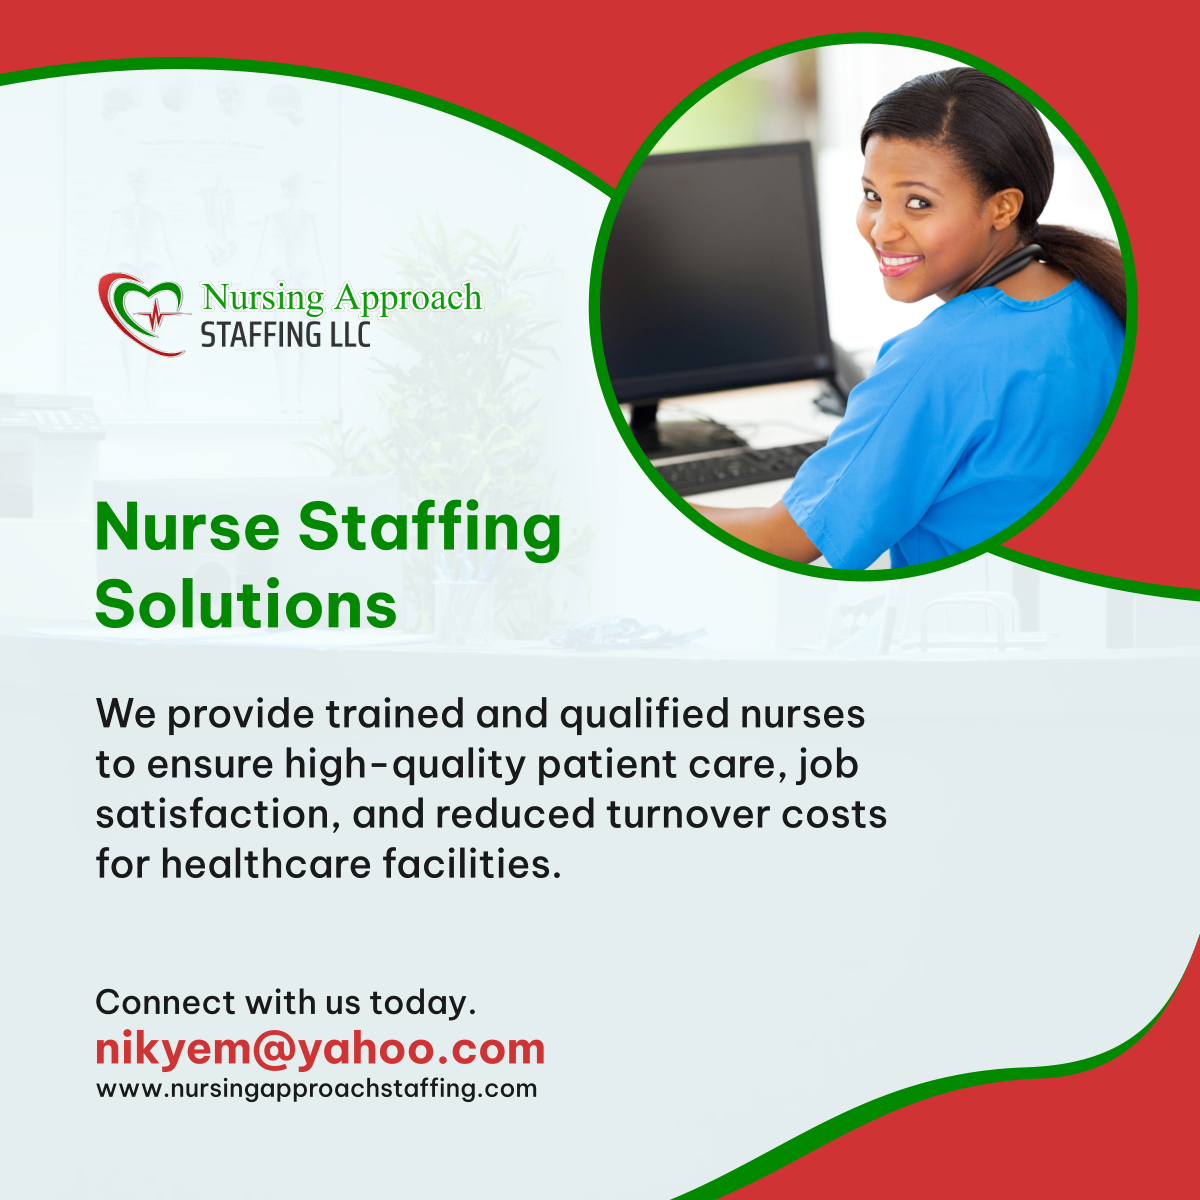 Looking for reliable nursing staff? Look no further! Our Nurse Staffing Solutions ensure top-quality care. Contact us today! 

#PhiladelphiaPA #HealthcareStaffing #NurseStaffing